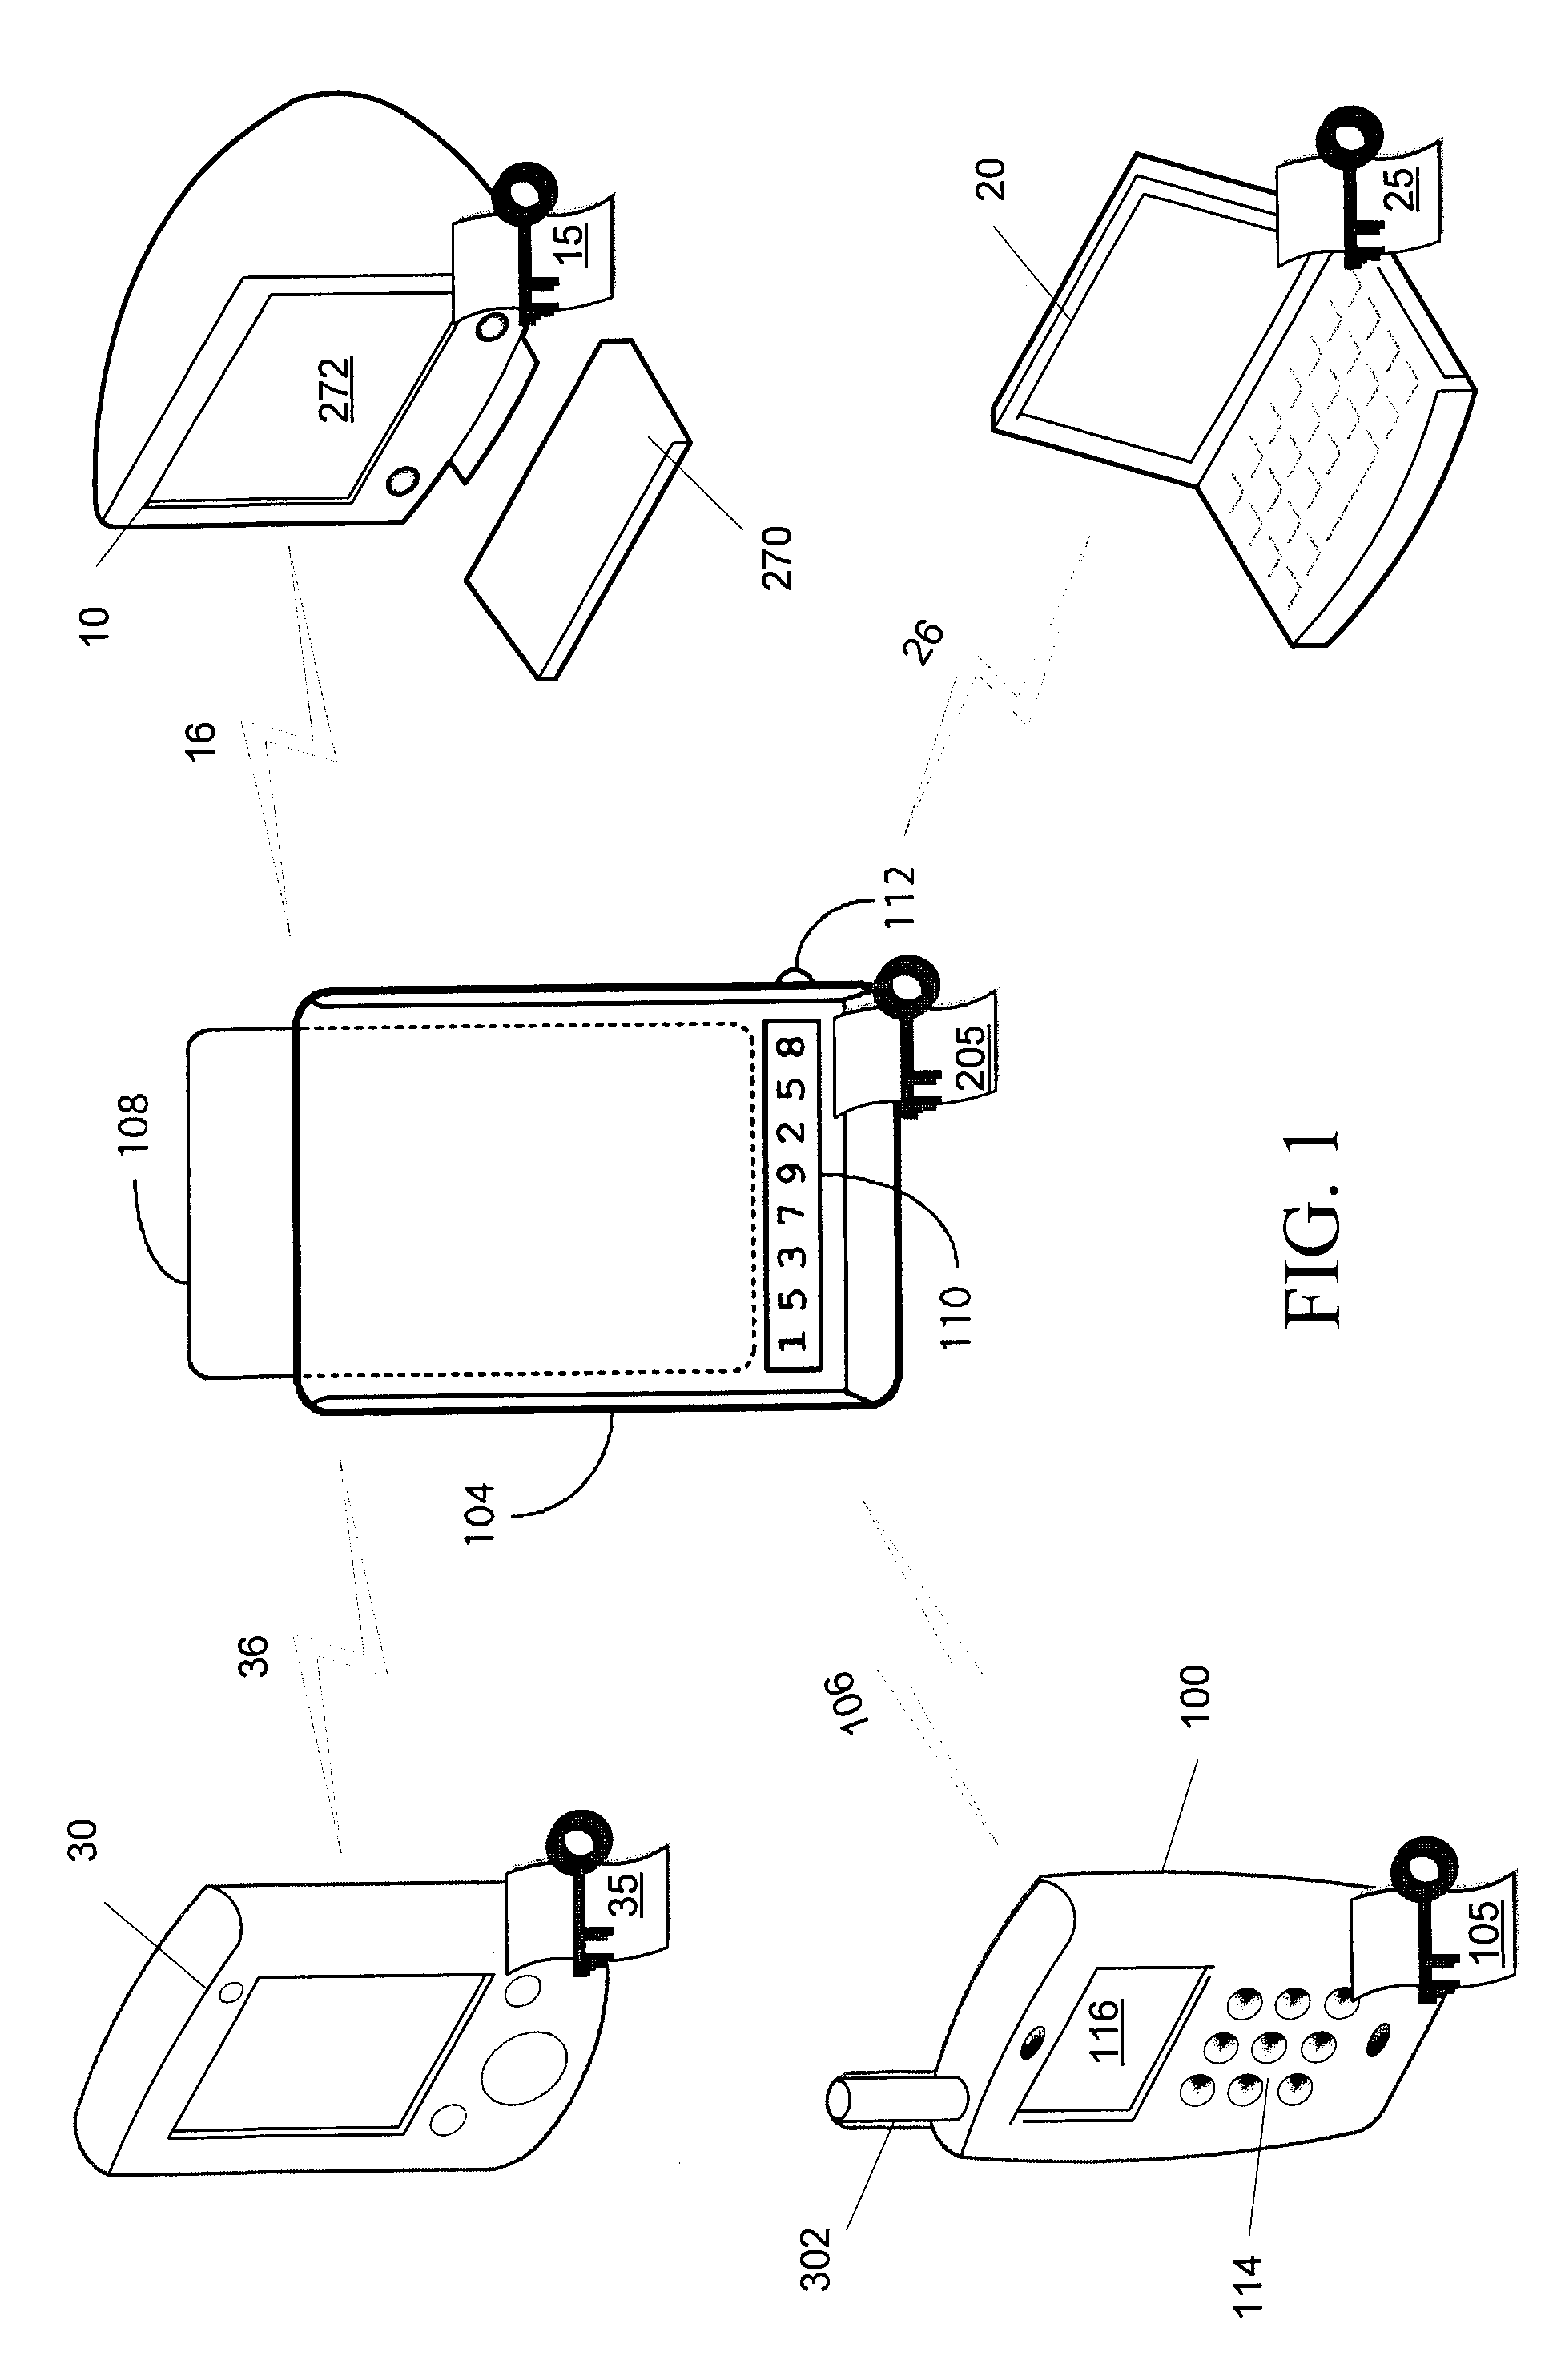 Management of multiple connections to a security token access device